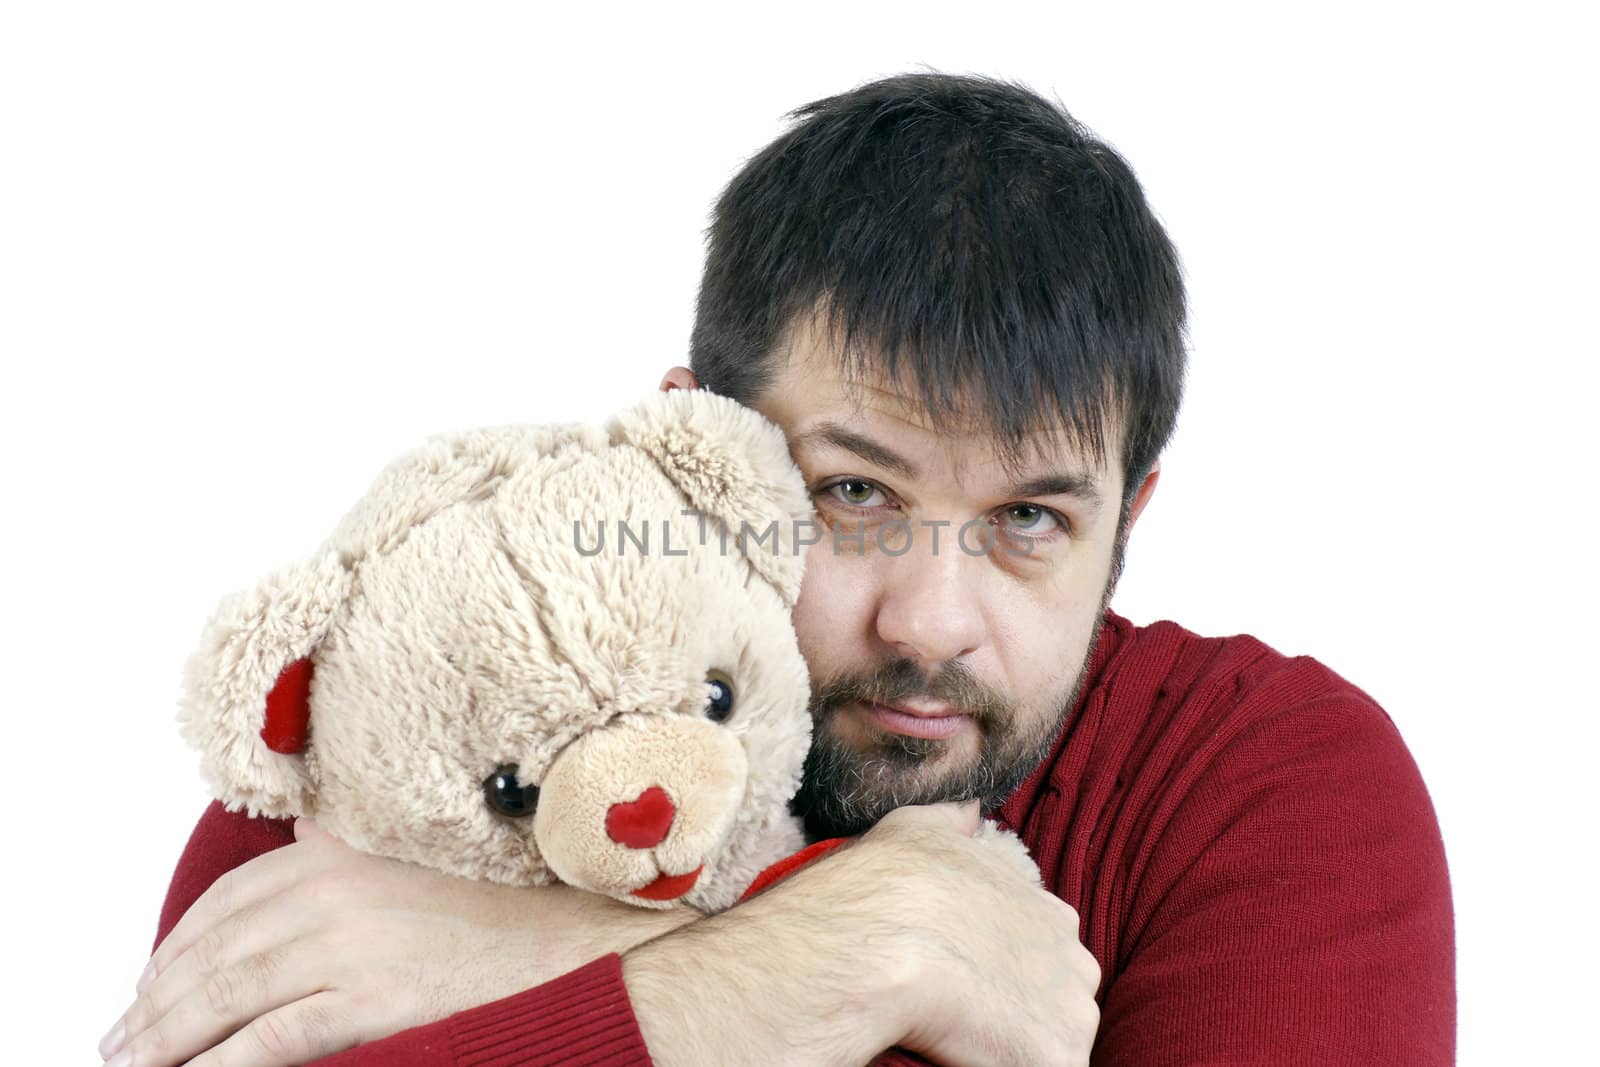 Contradiction: big tough middle age bearded man giveing a big hug to a soft and cute teddy bear.